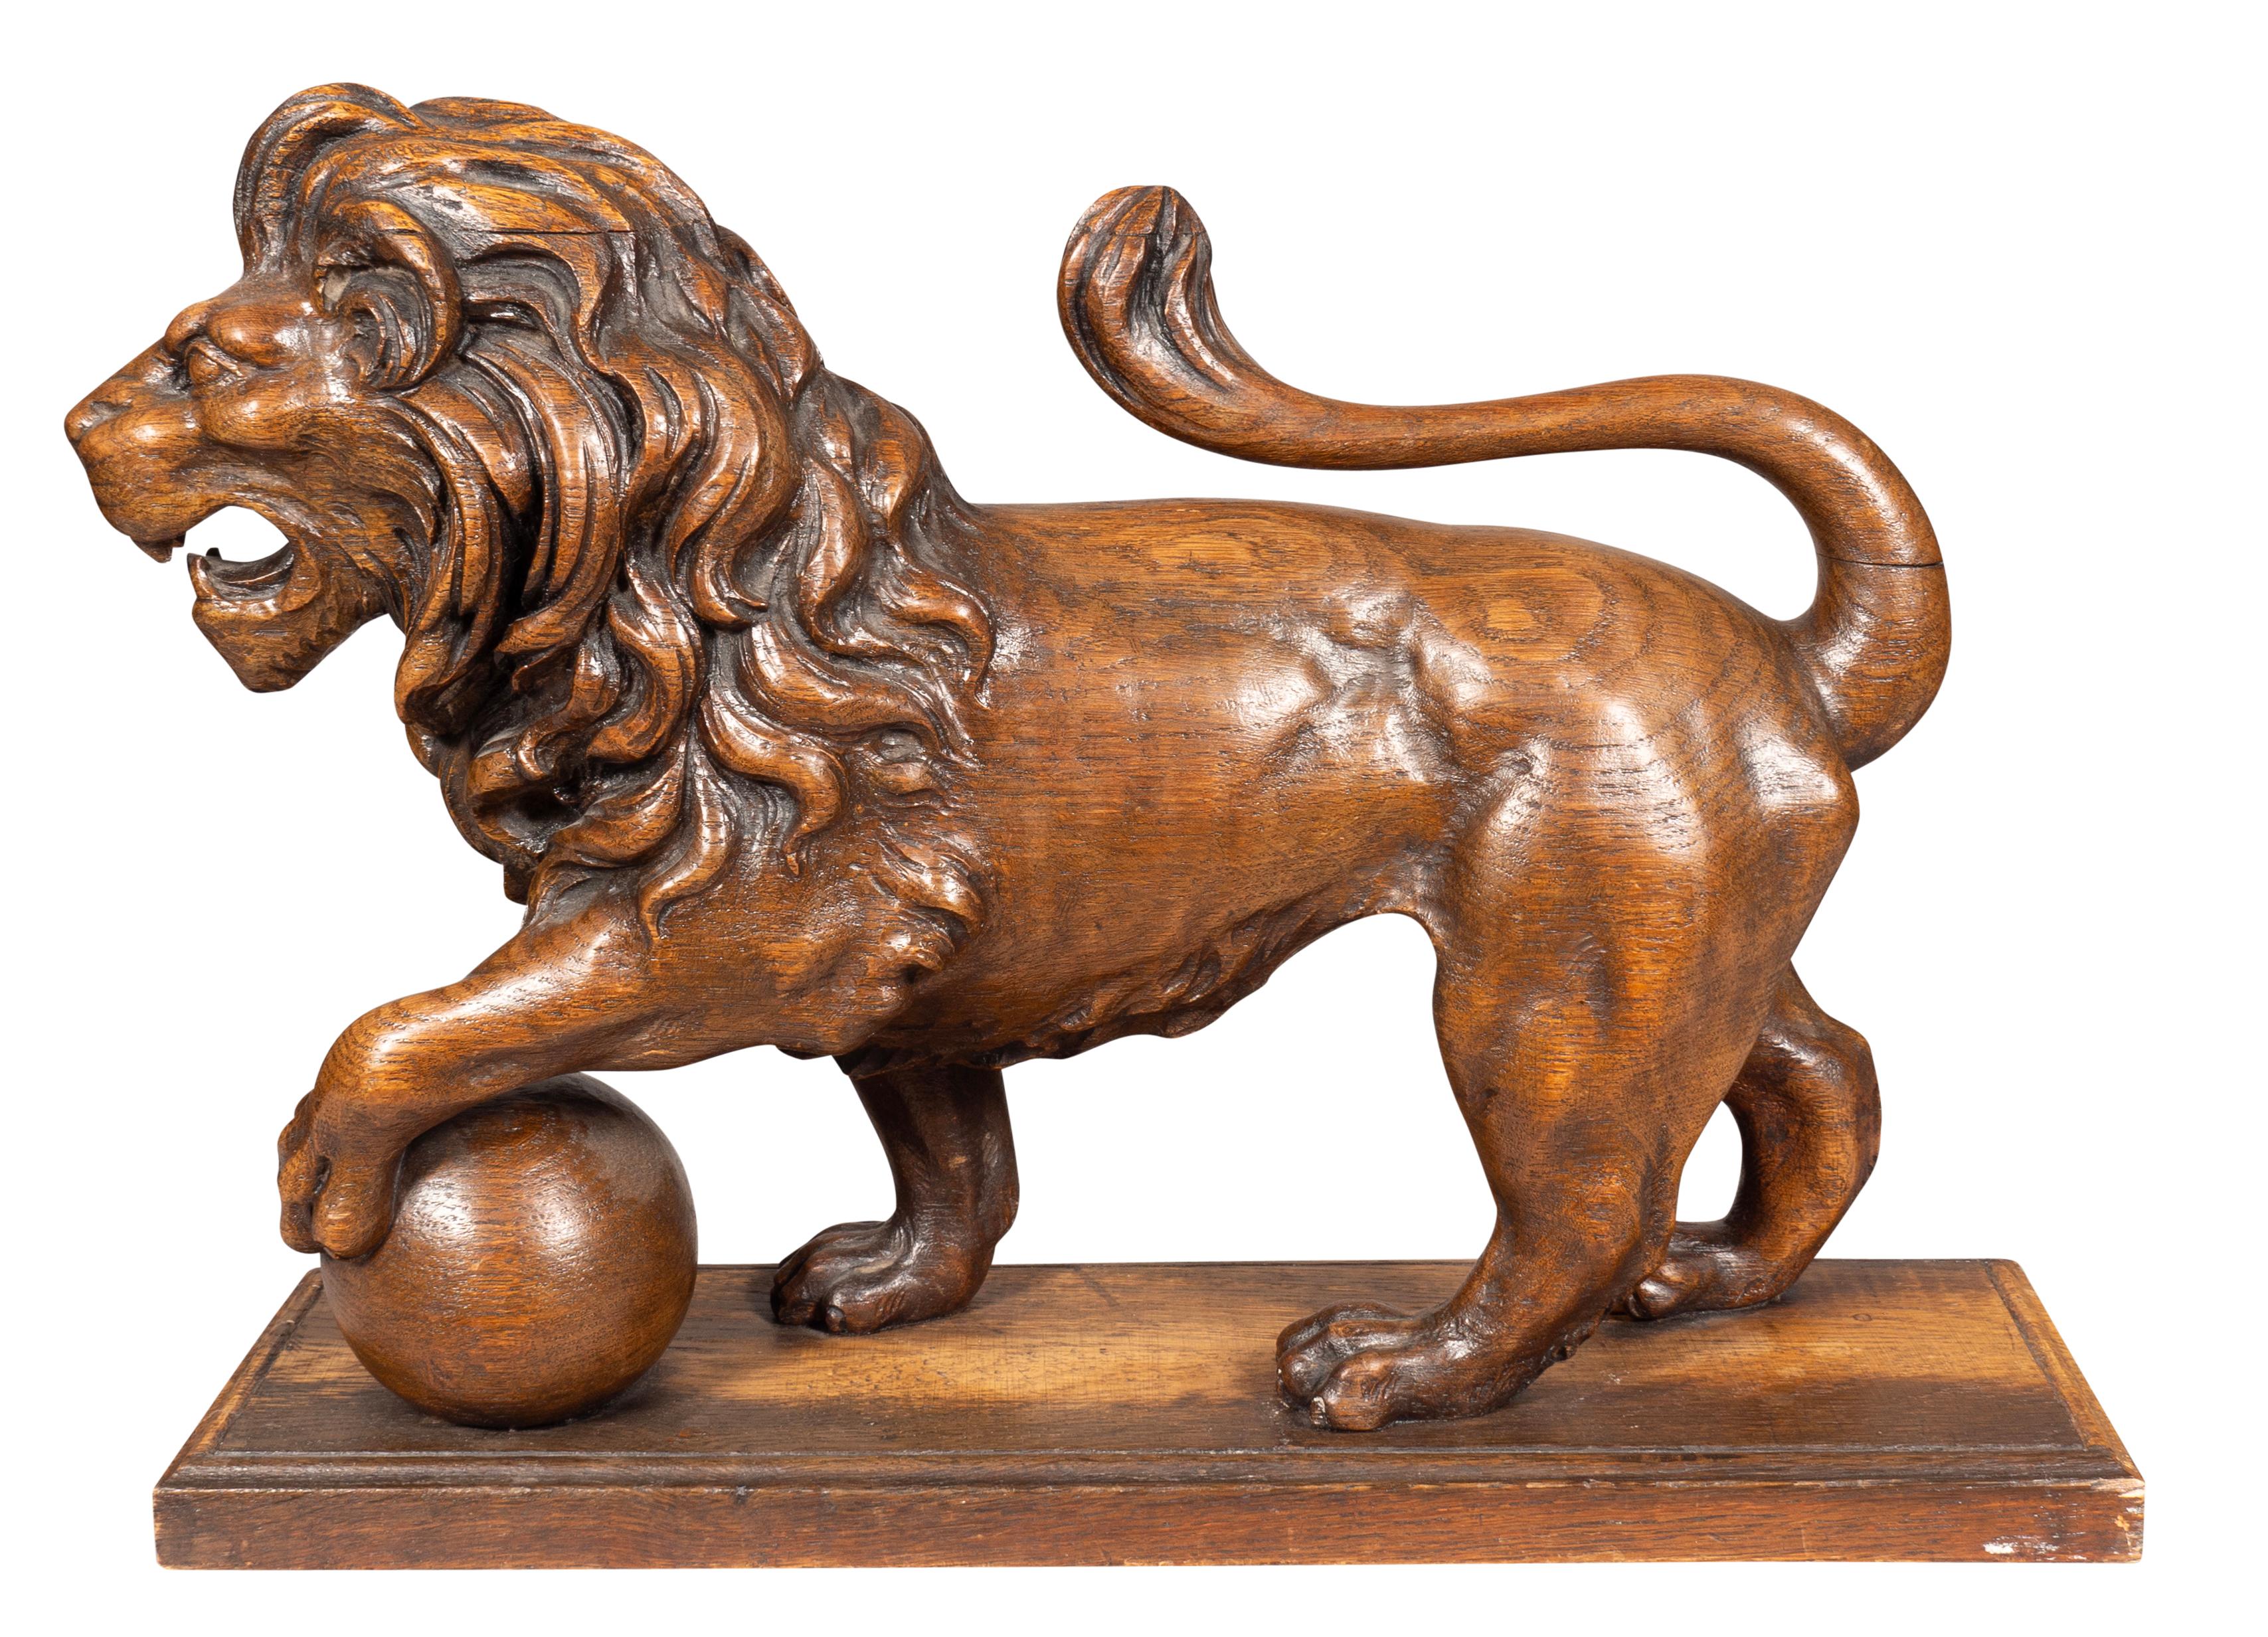 A well carved standing lion with front foot on an sphere. Rectangular base. Amherst Massachusetts estate.